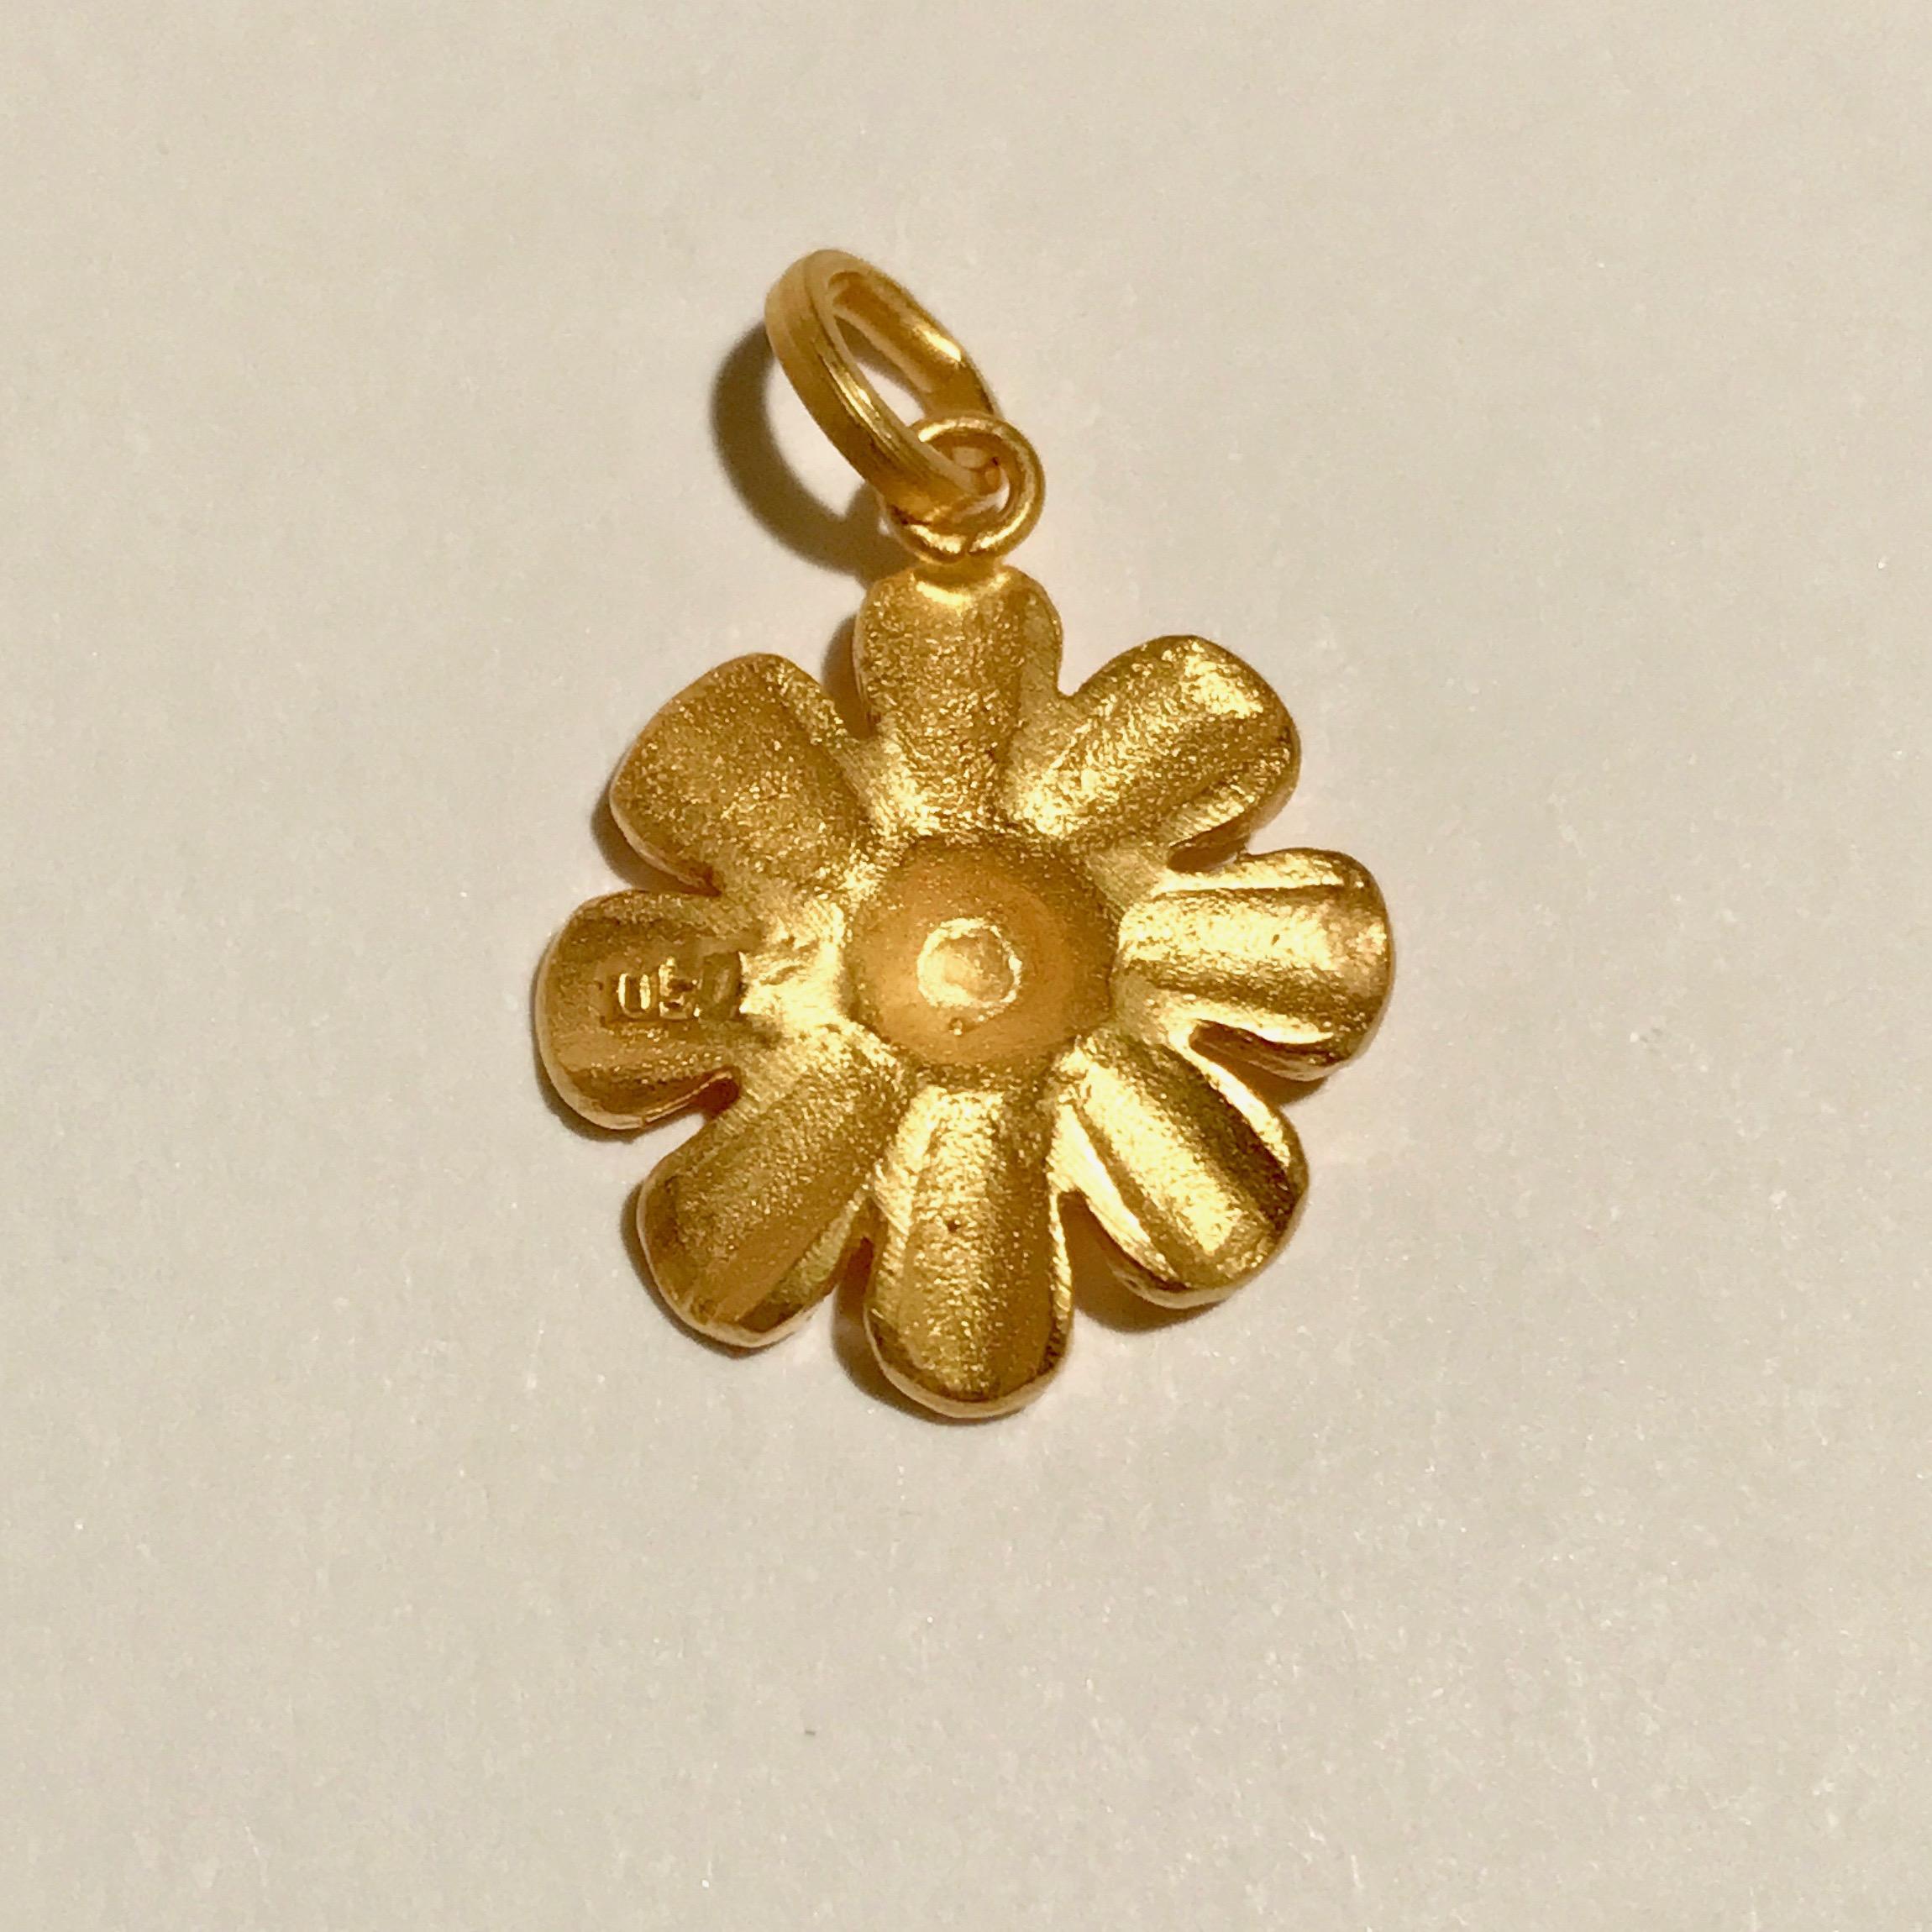 18 Karat Solid Yellow Gold Satin Finish Flower Pendant Chain Necklace In New Condition For Sale In London, GB